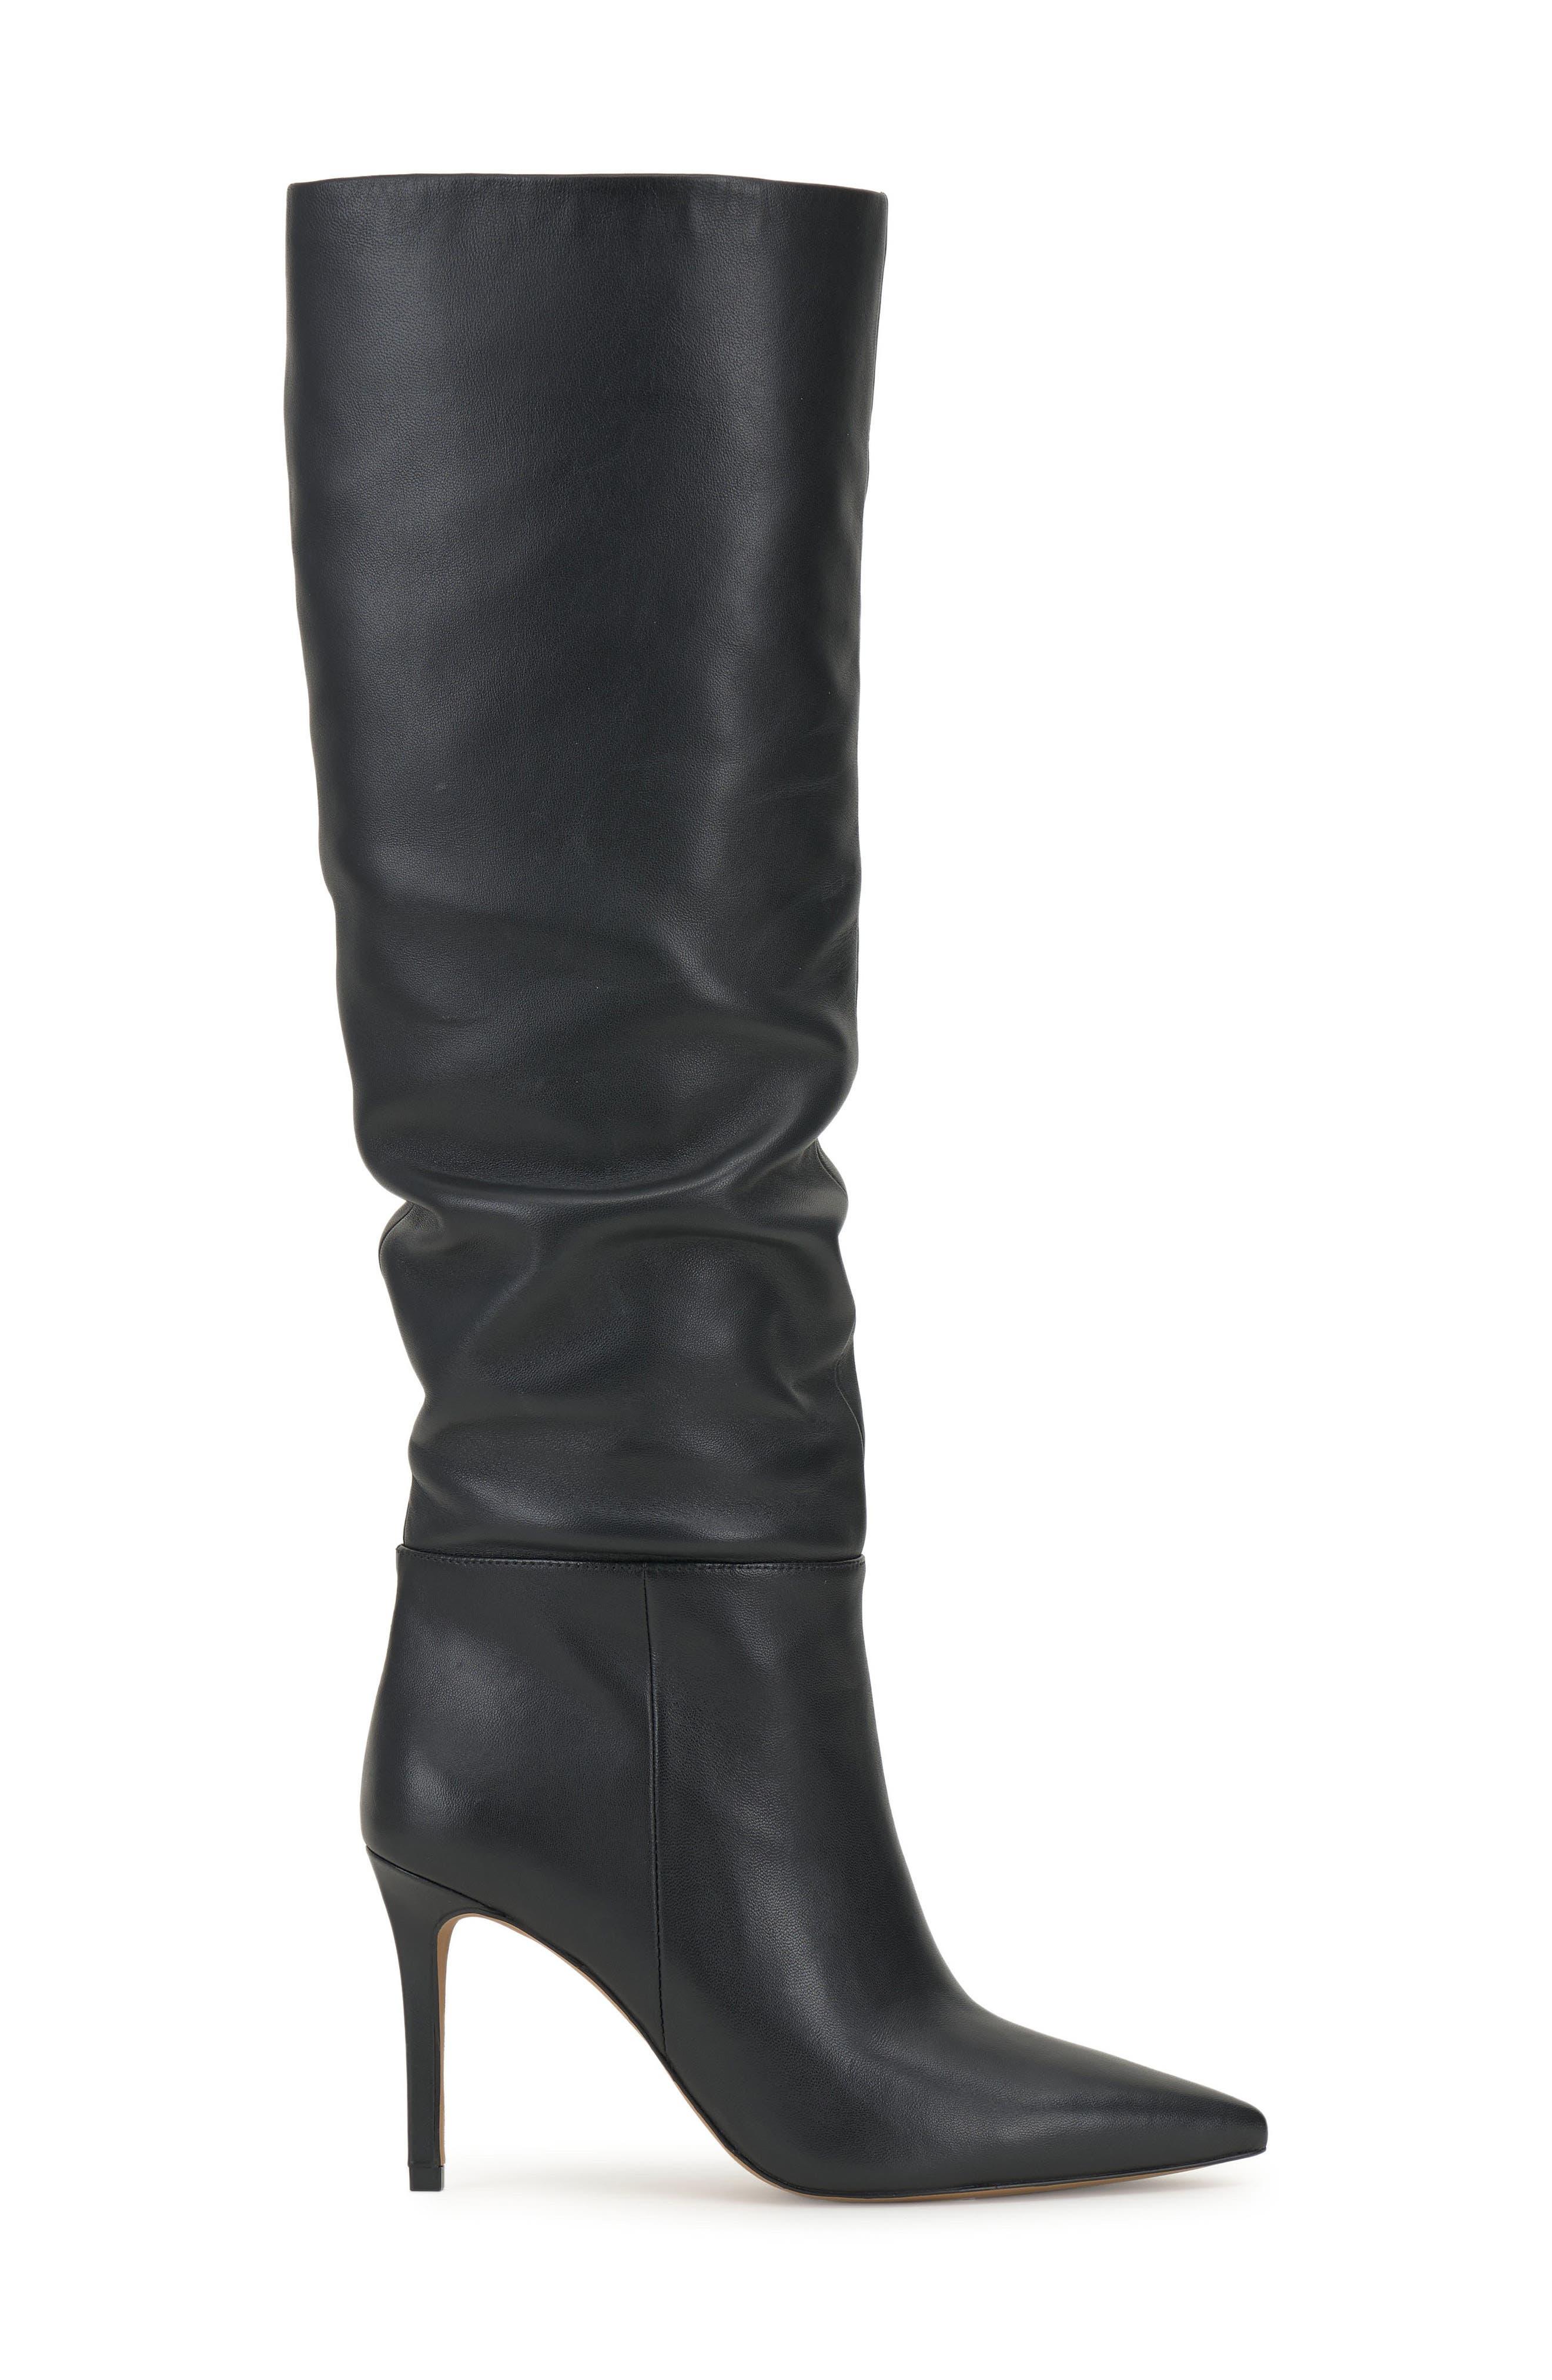 Vince Camuto Kashleigh Pointed Toe Knee High Boot in Black | Lyst